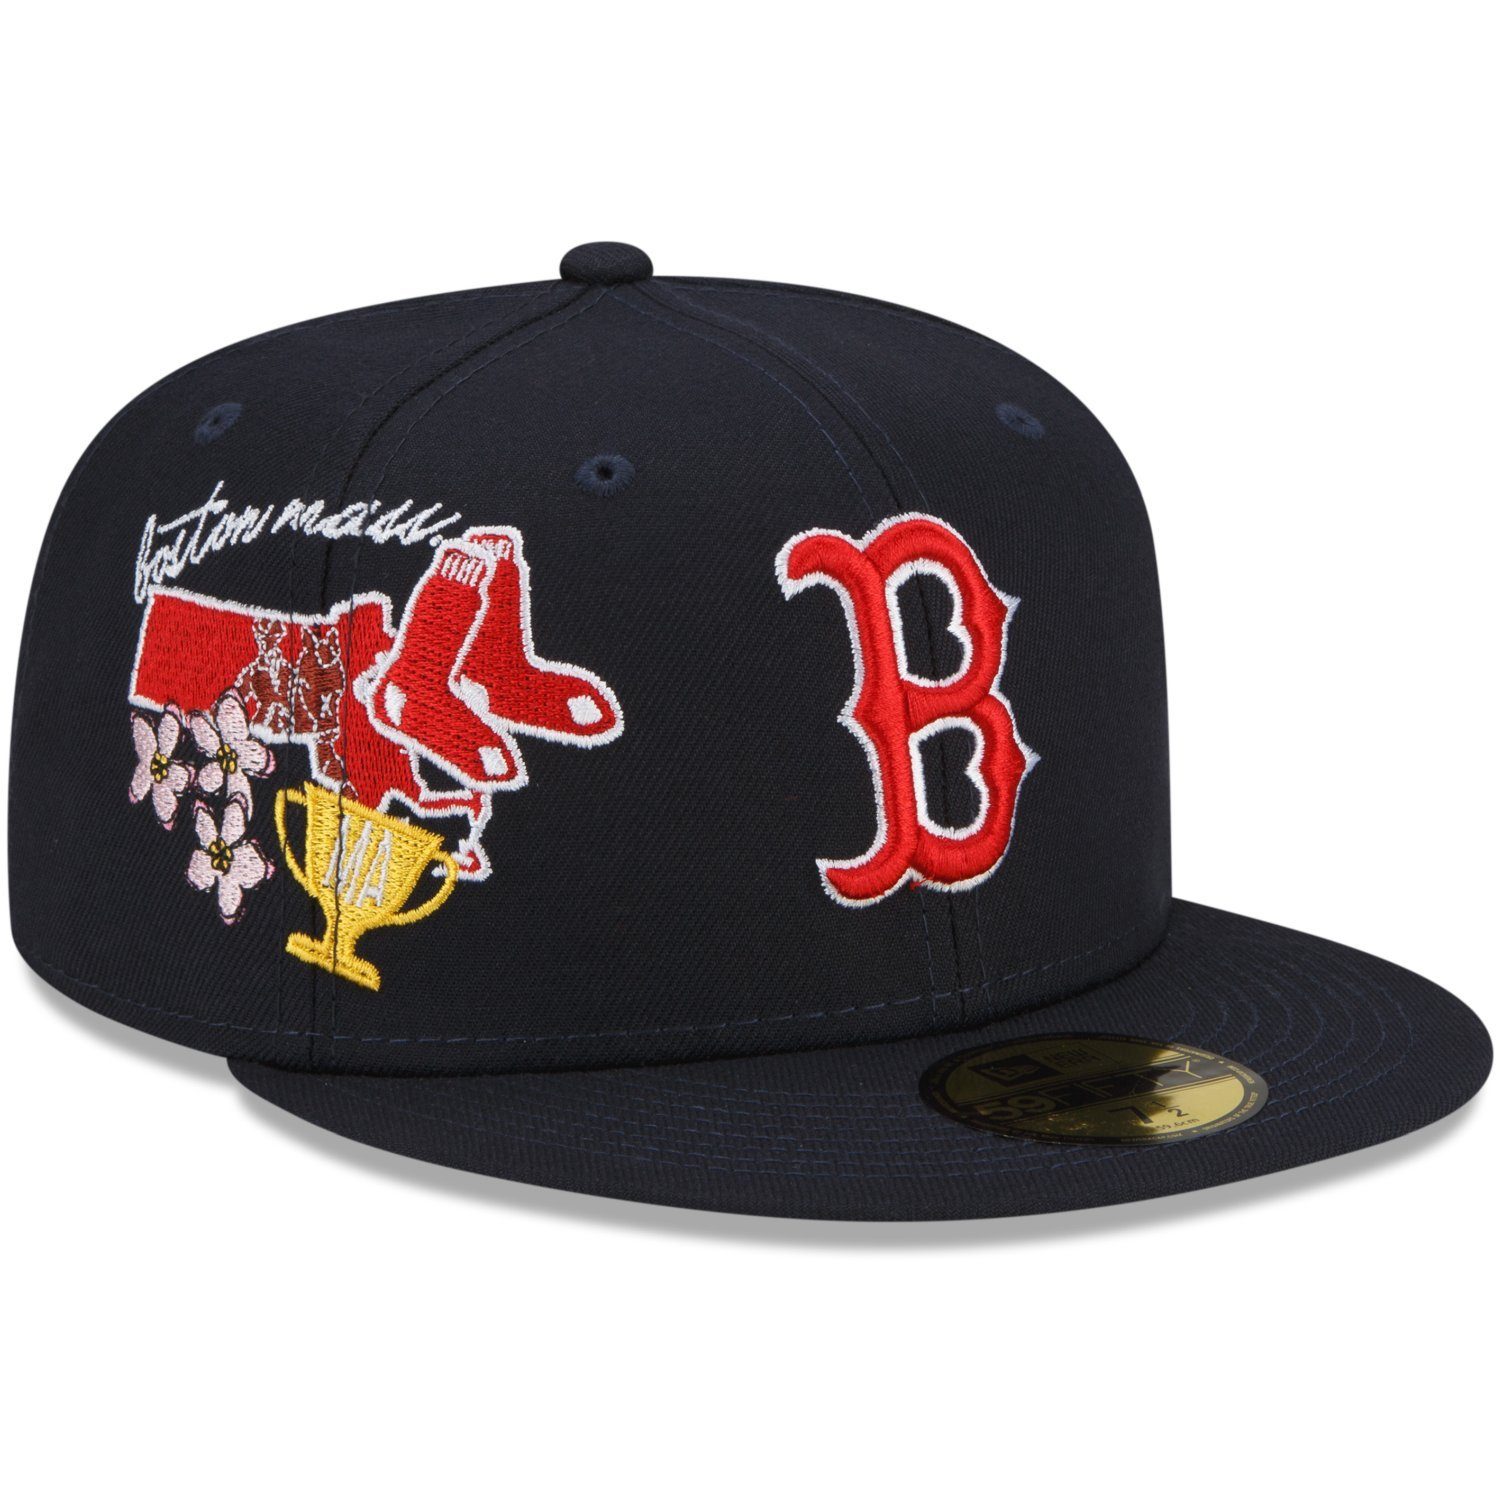 59Fifty New Era Red CLUSTER CITY Boston Cap Sox Fitted